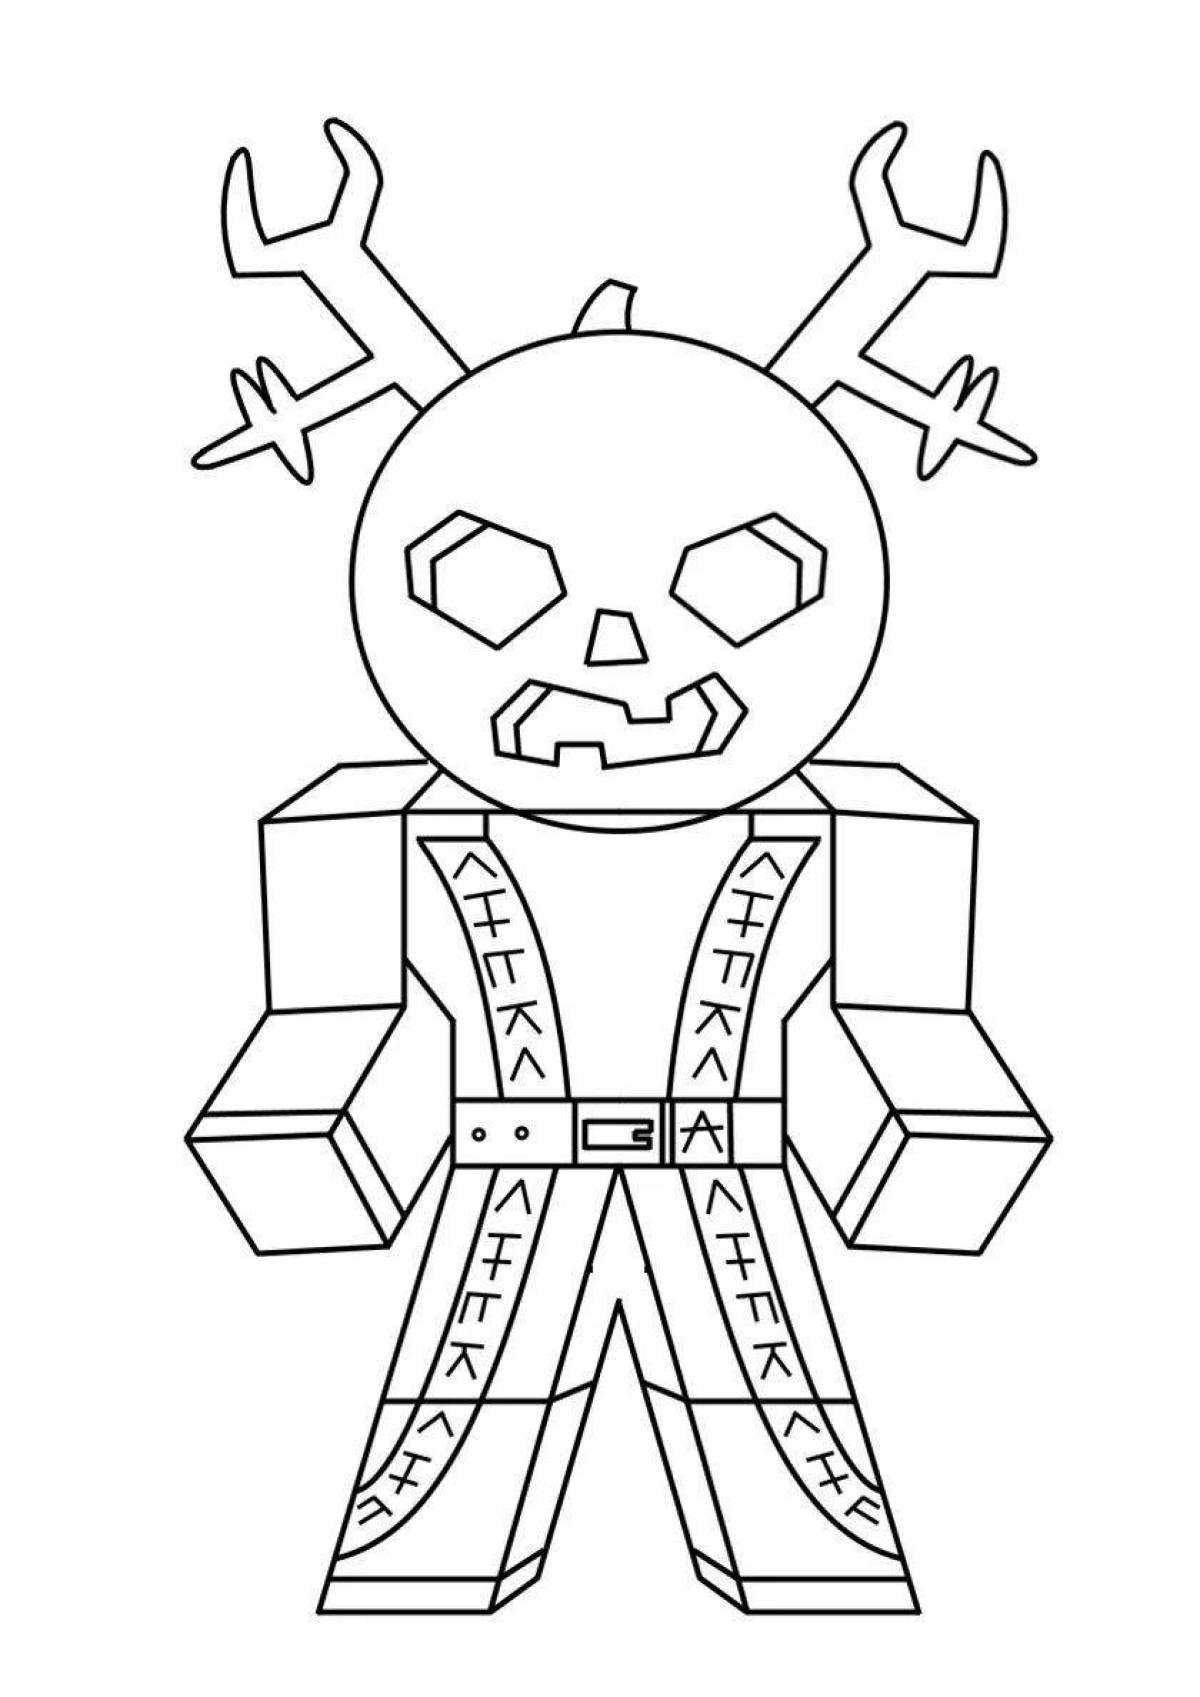 Playful roblox skins coloring page for girls